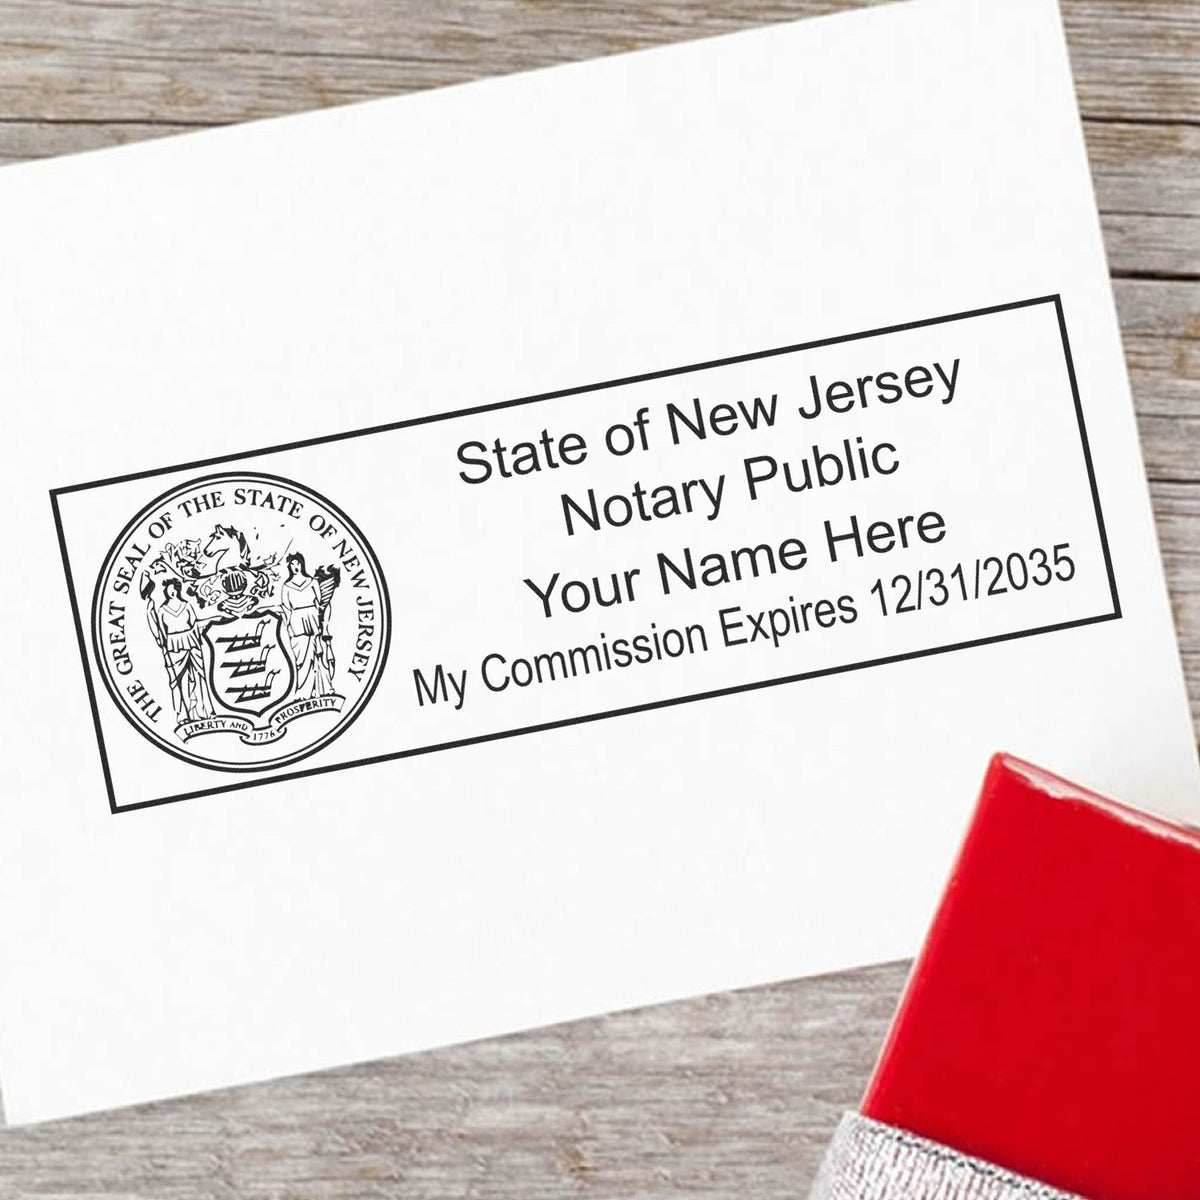 This paper is stamped with a sample imprint of the Super Slim New Jersey Notary Public Stamp, signifying its quality and reliability.